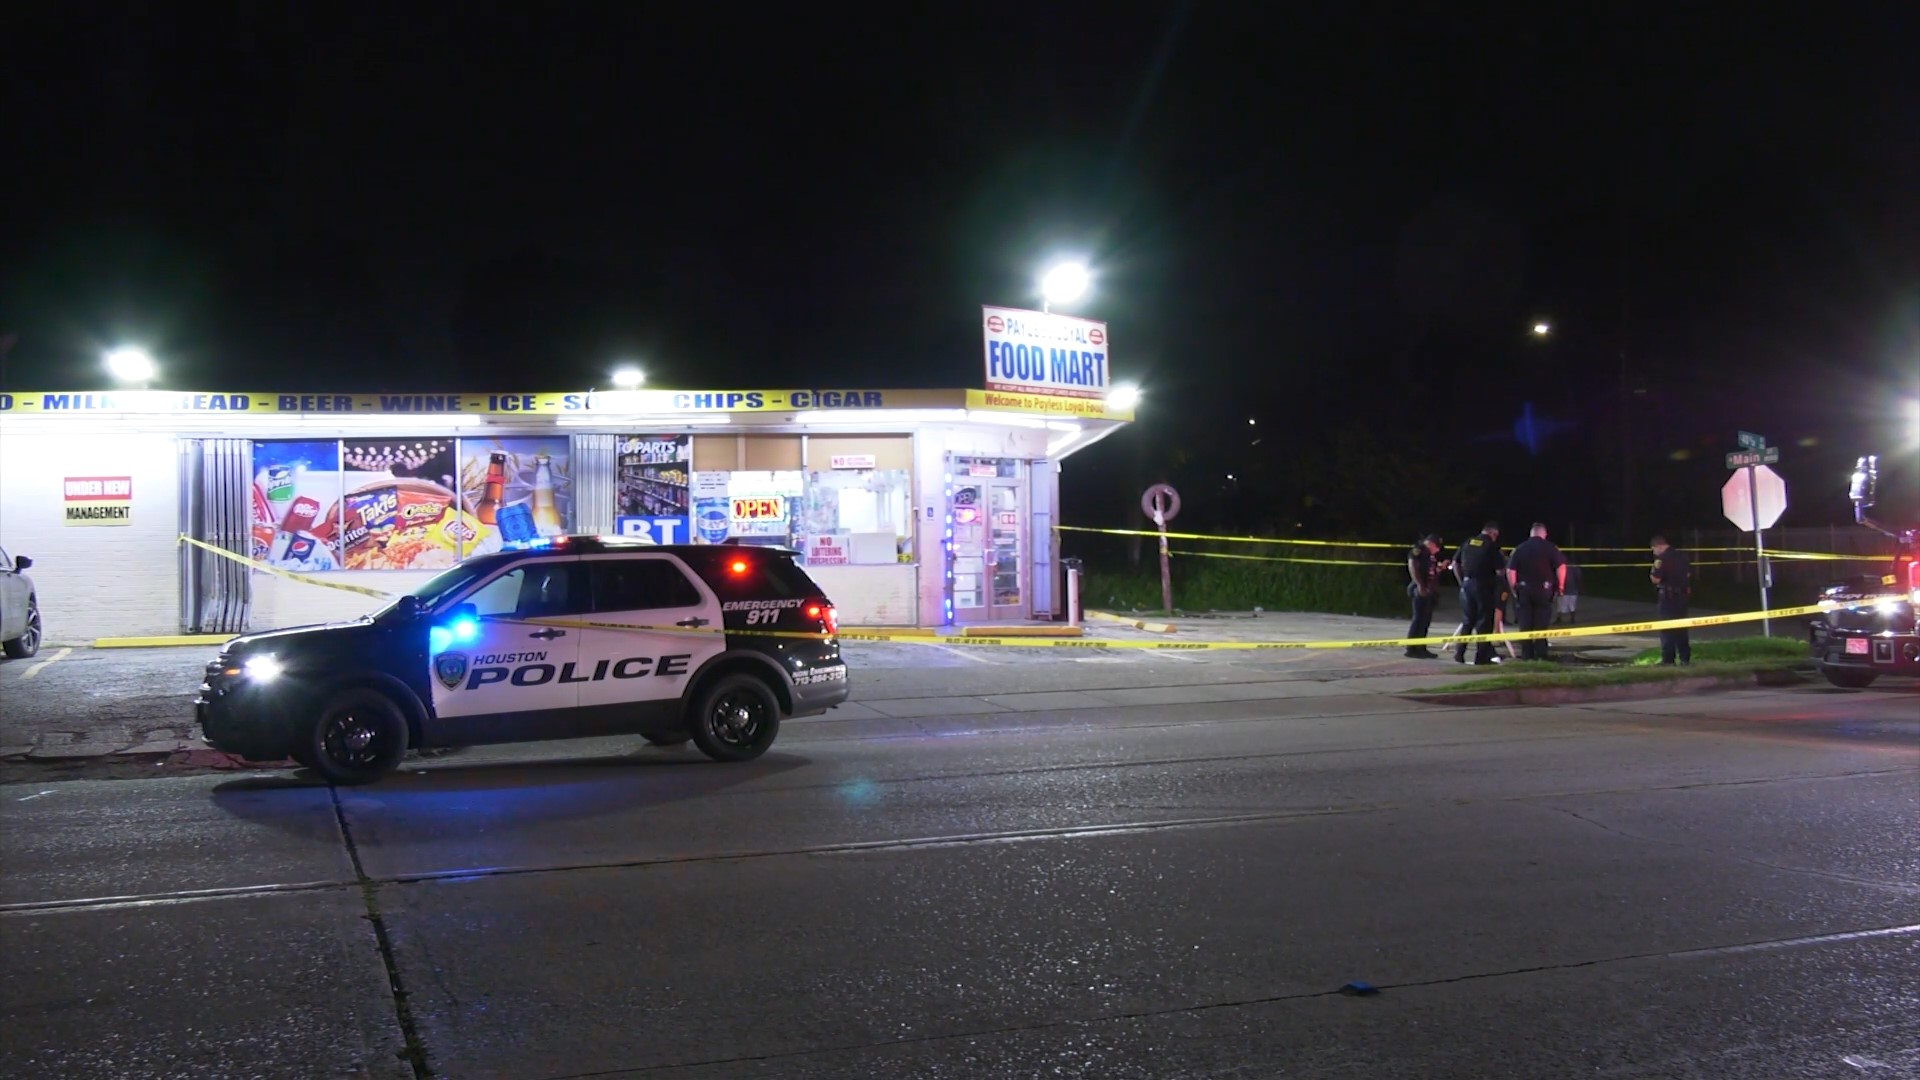 Police said the two men got into an altercation outside before the gunman opened fire and left the scene riding a bike.